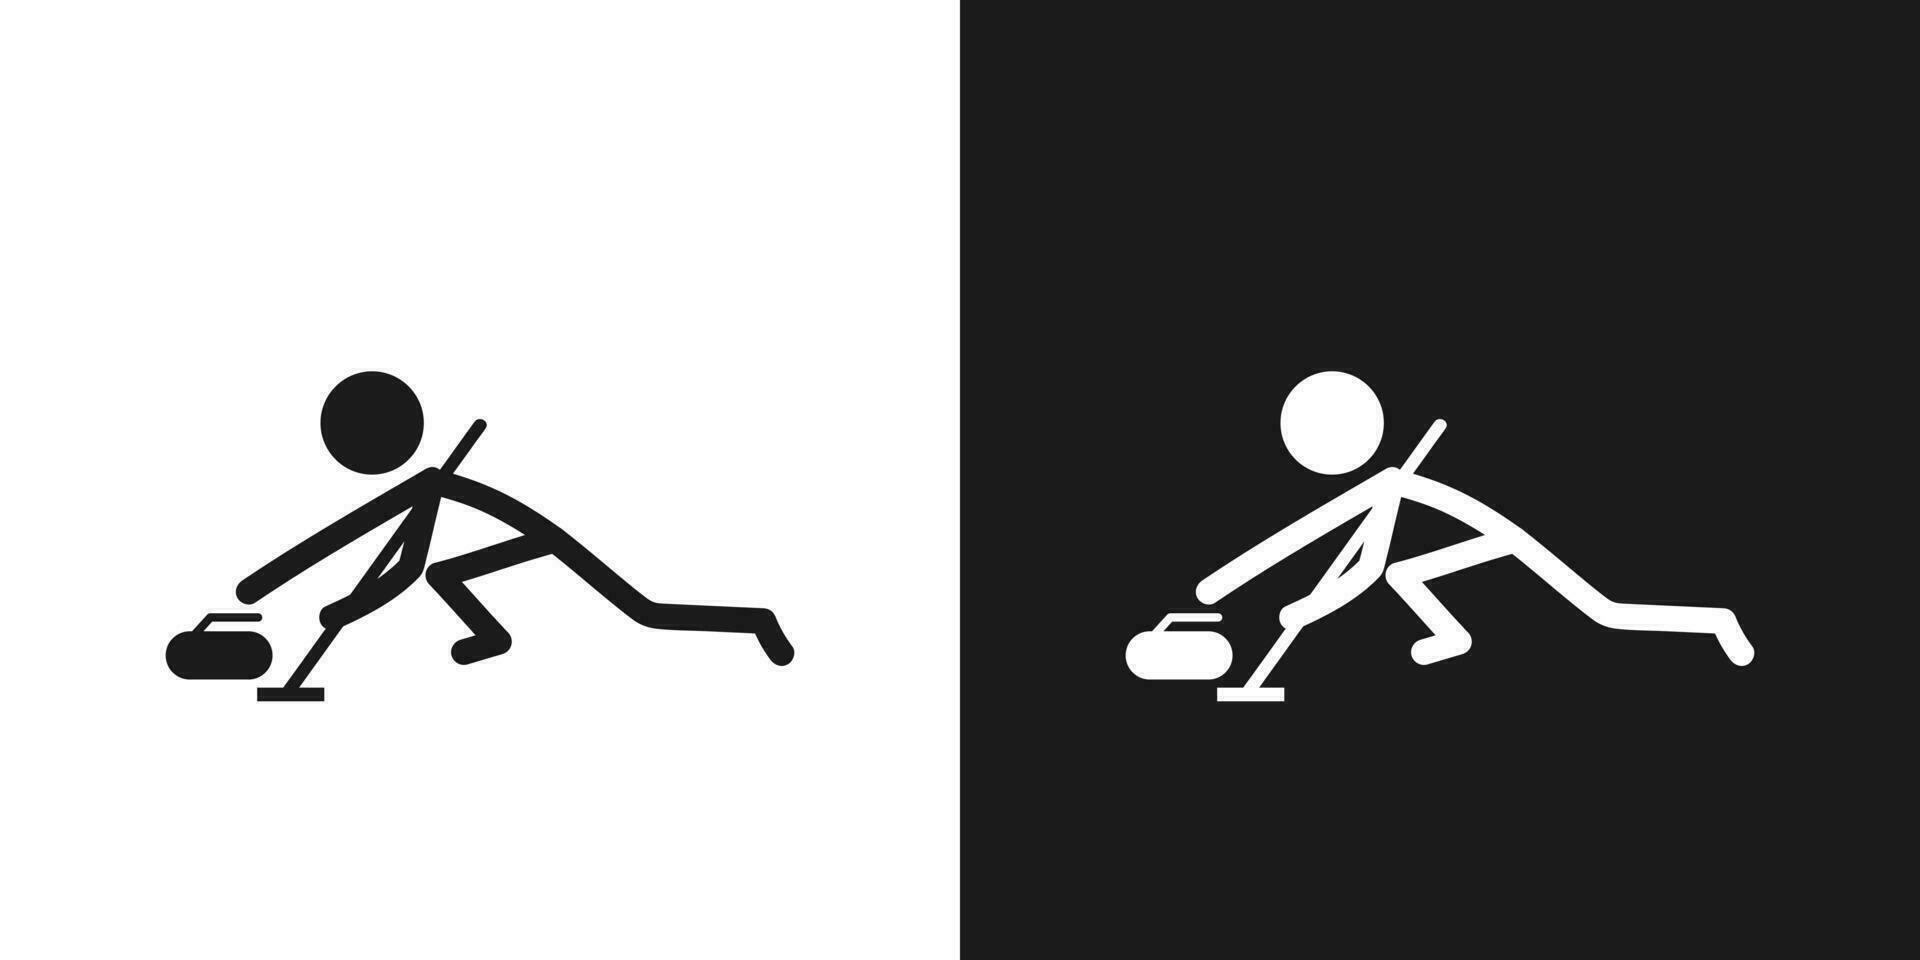 Curling sport icon pictogram vector design. Stick figure man curling player or Curler vector icon sign symbol pictogram. Winter ice sports concept